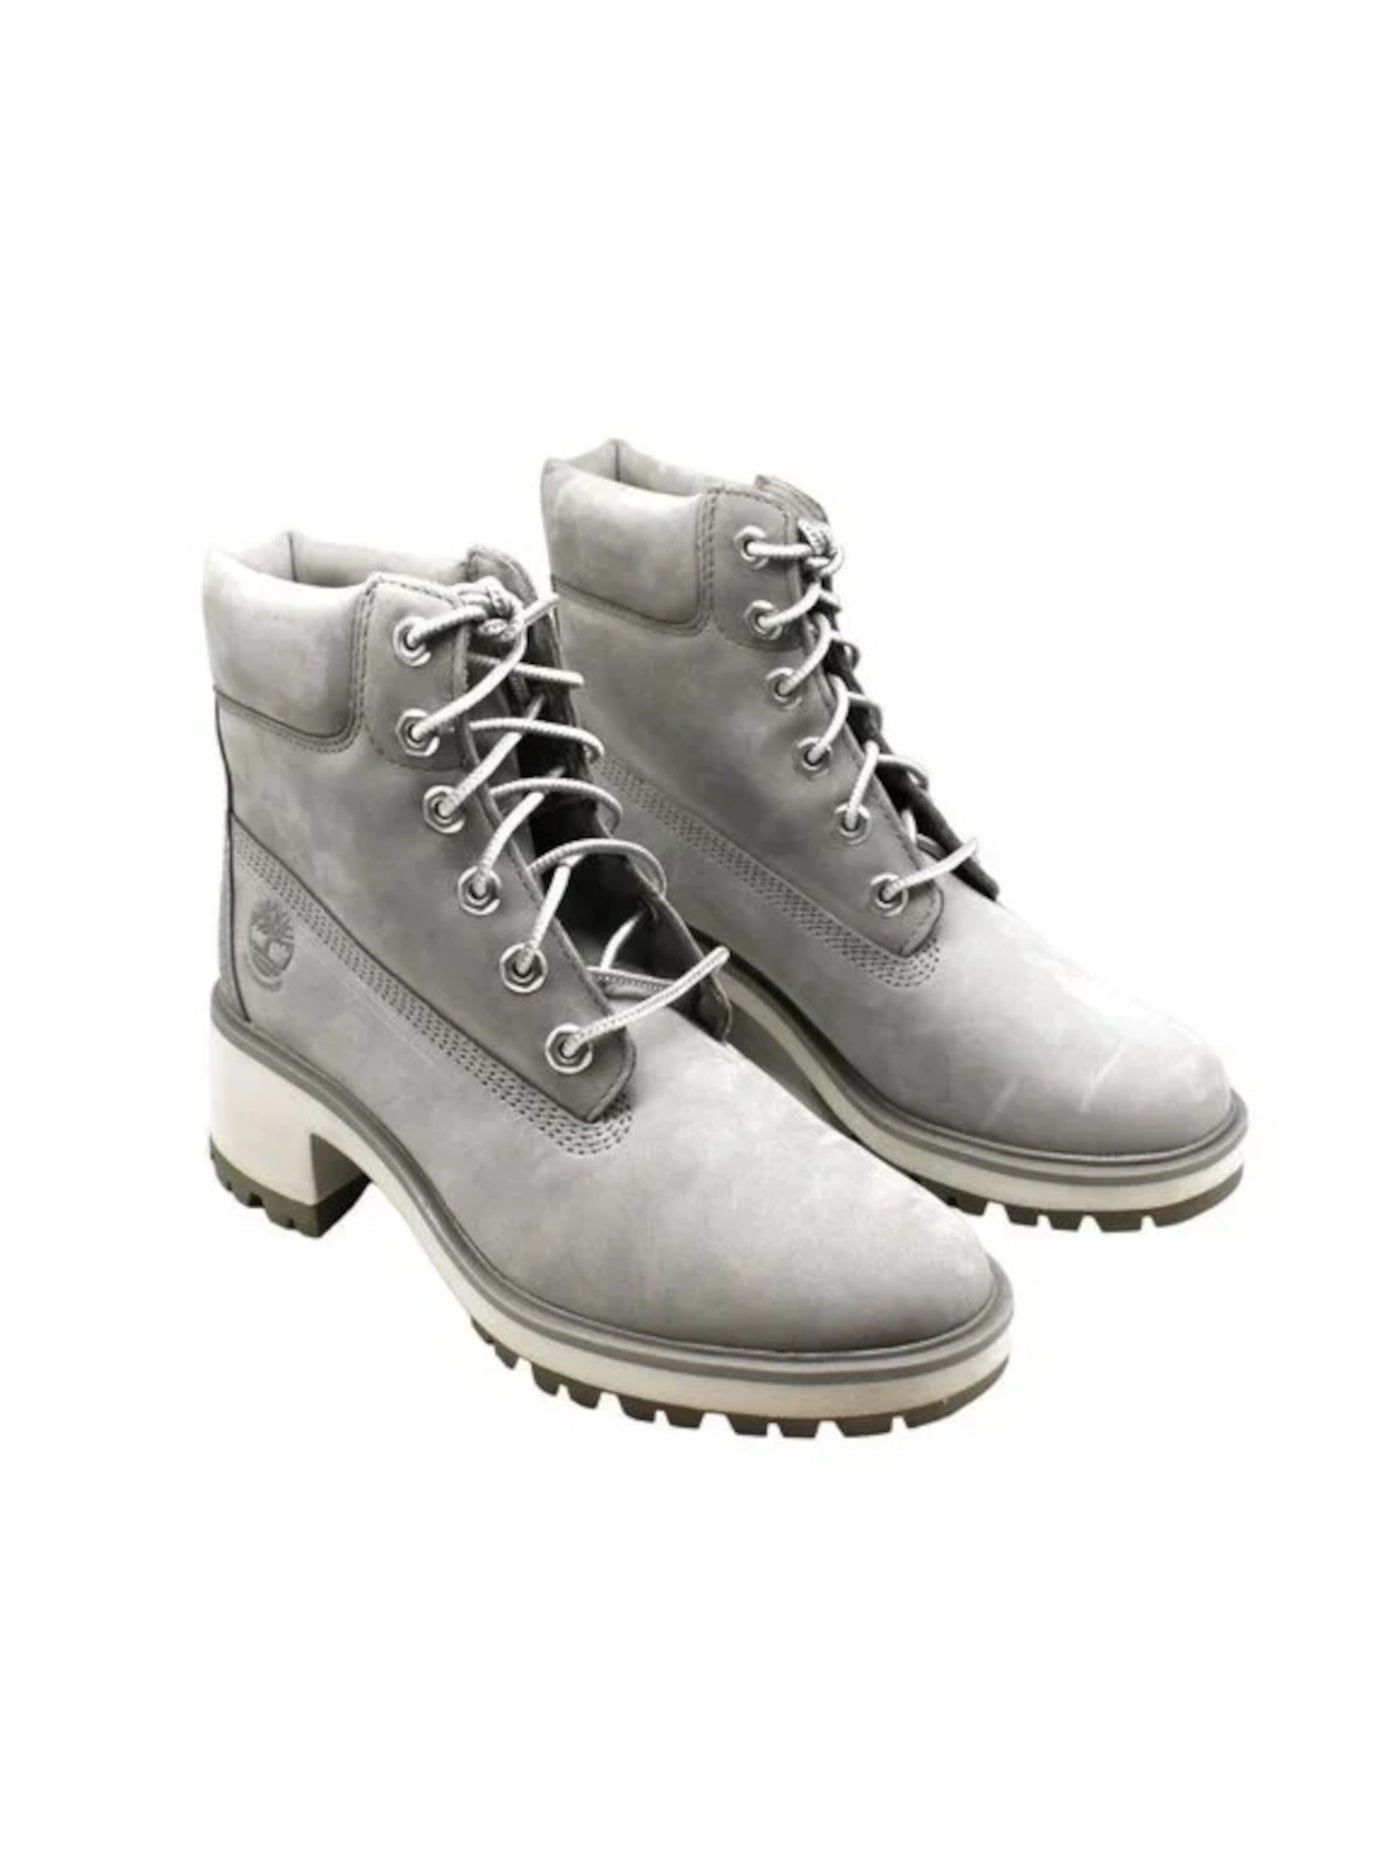 TIMBERLAND Womens Gray Padded Lug Sole Waterproof Kinsley Round Toe Block Heel Lace-Up Leather Boots Shoes 9.5